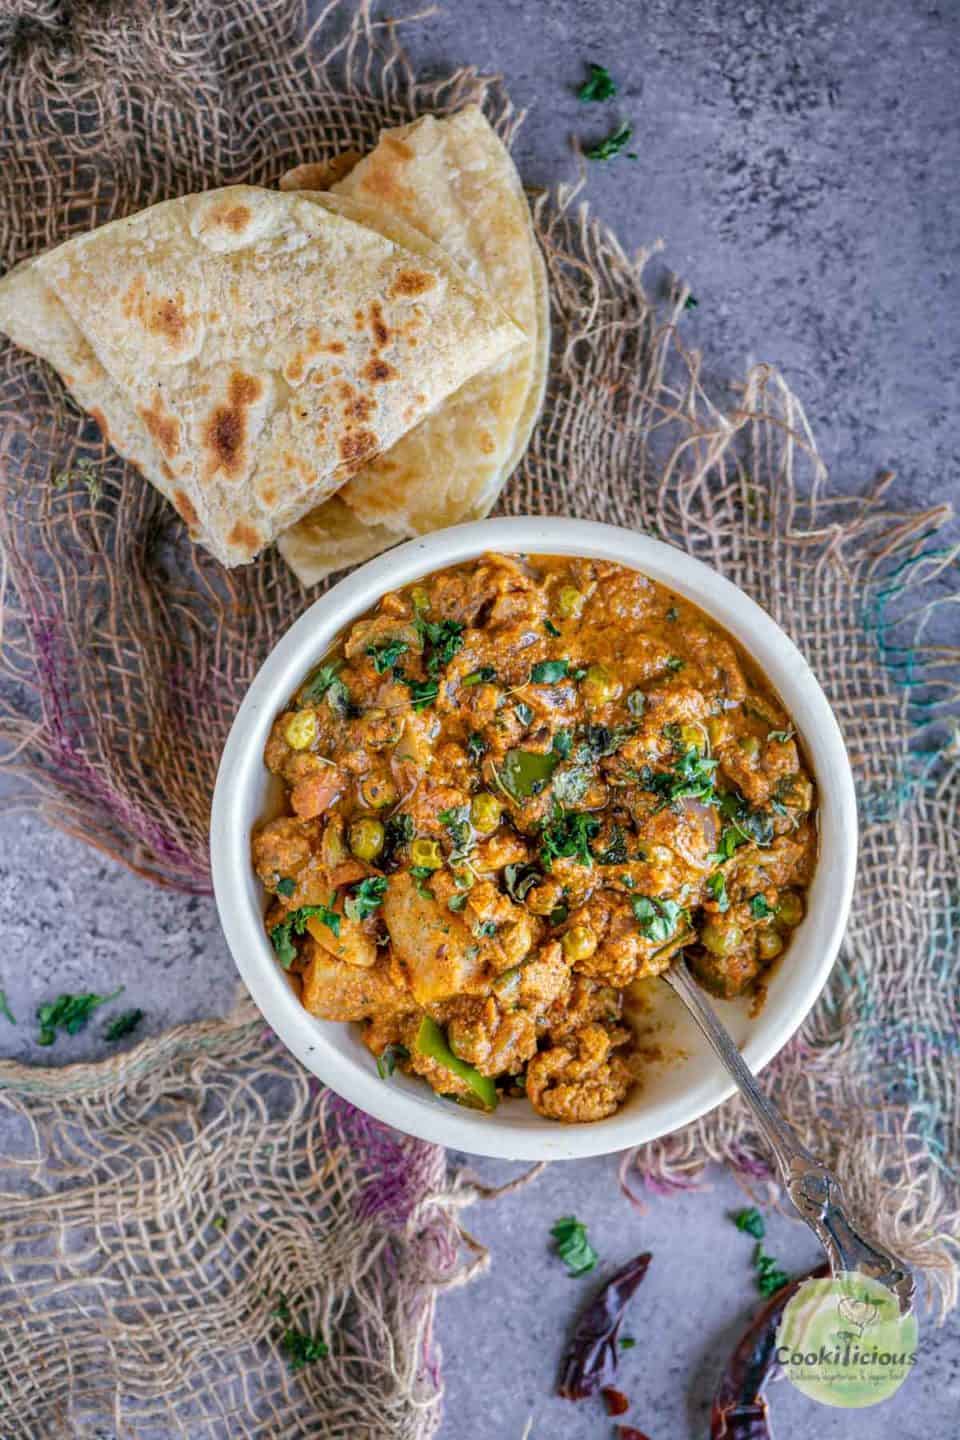 Veg Kolhapuri Recipe | Mixed Veg Curry served in a round bowl with chapati on the side